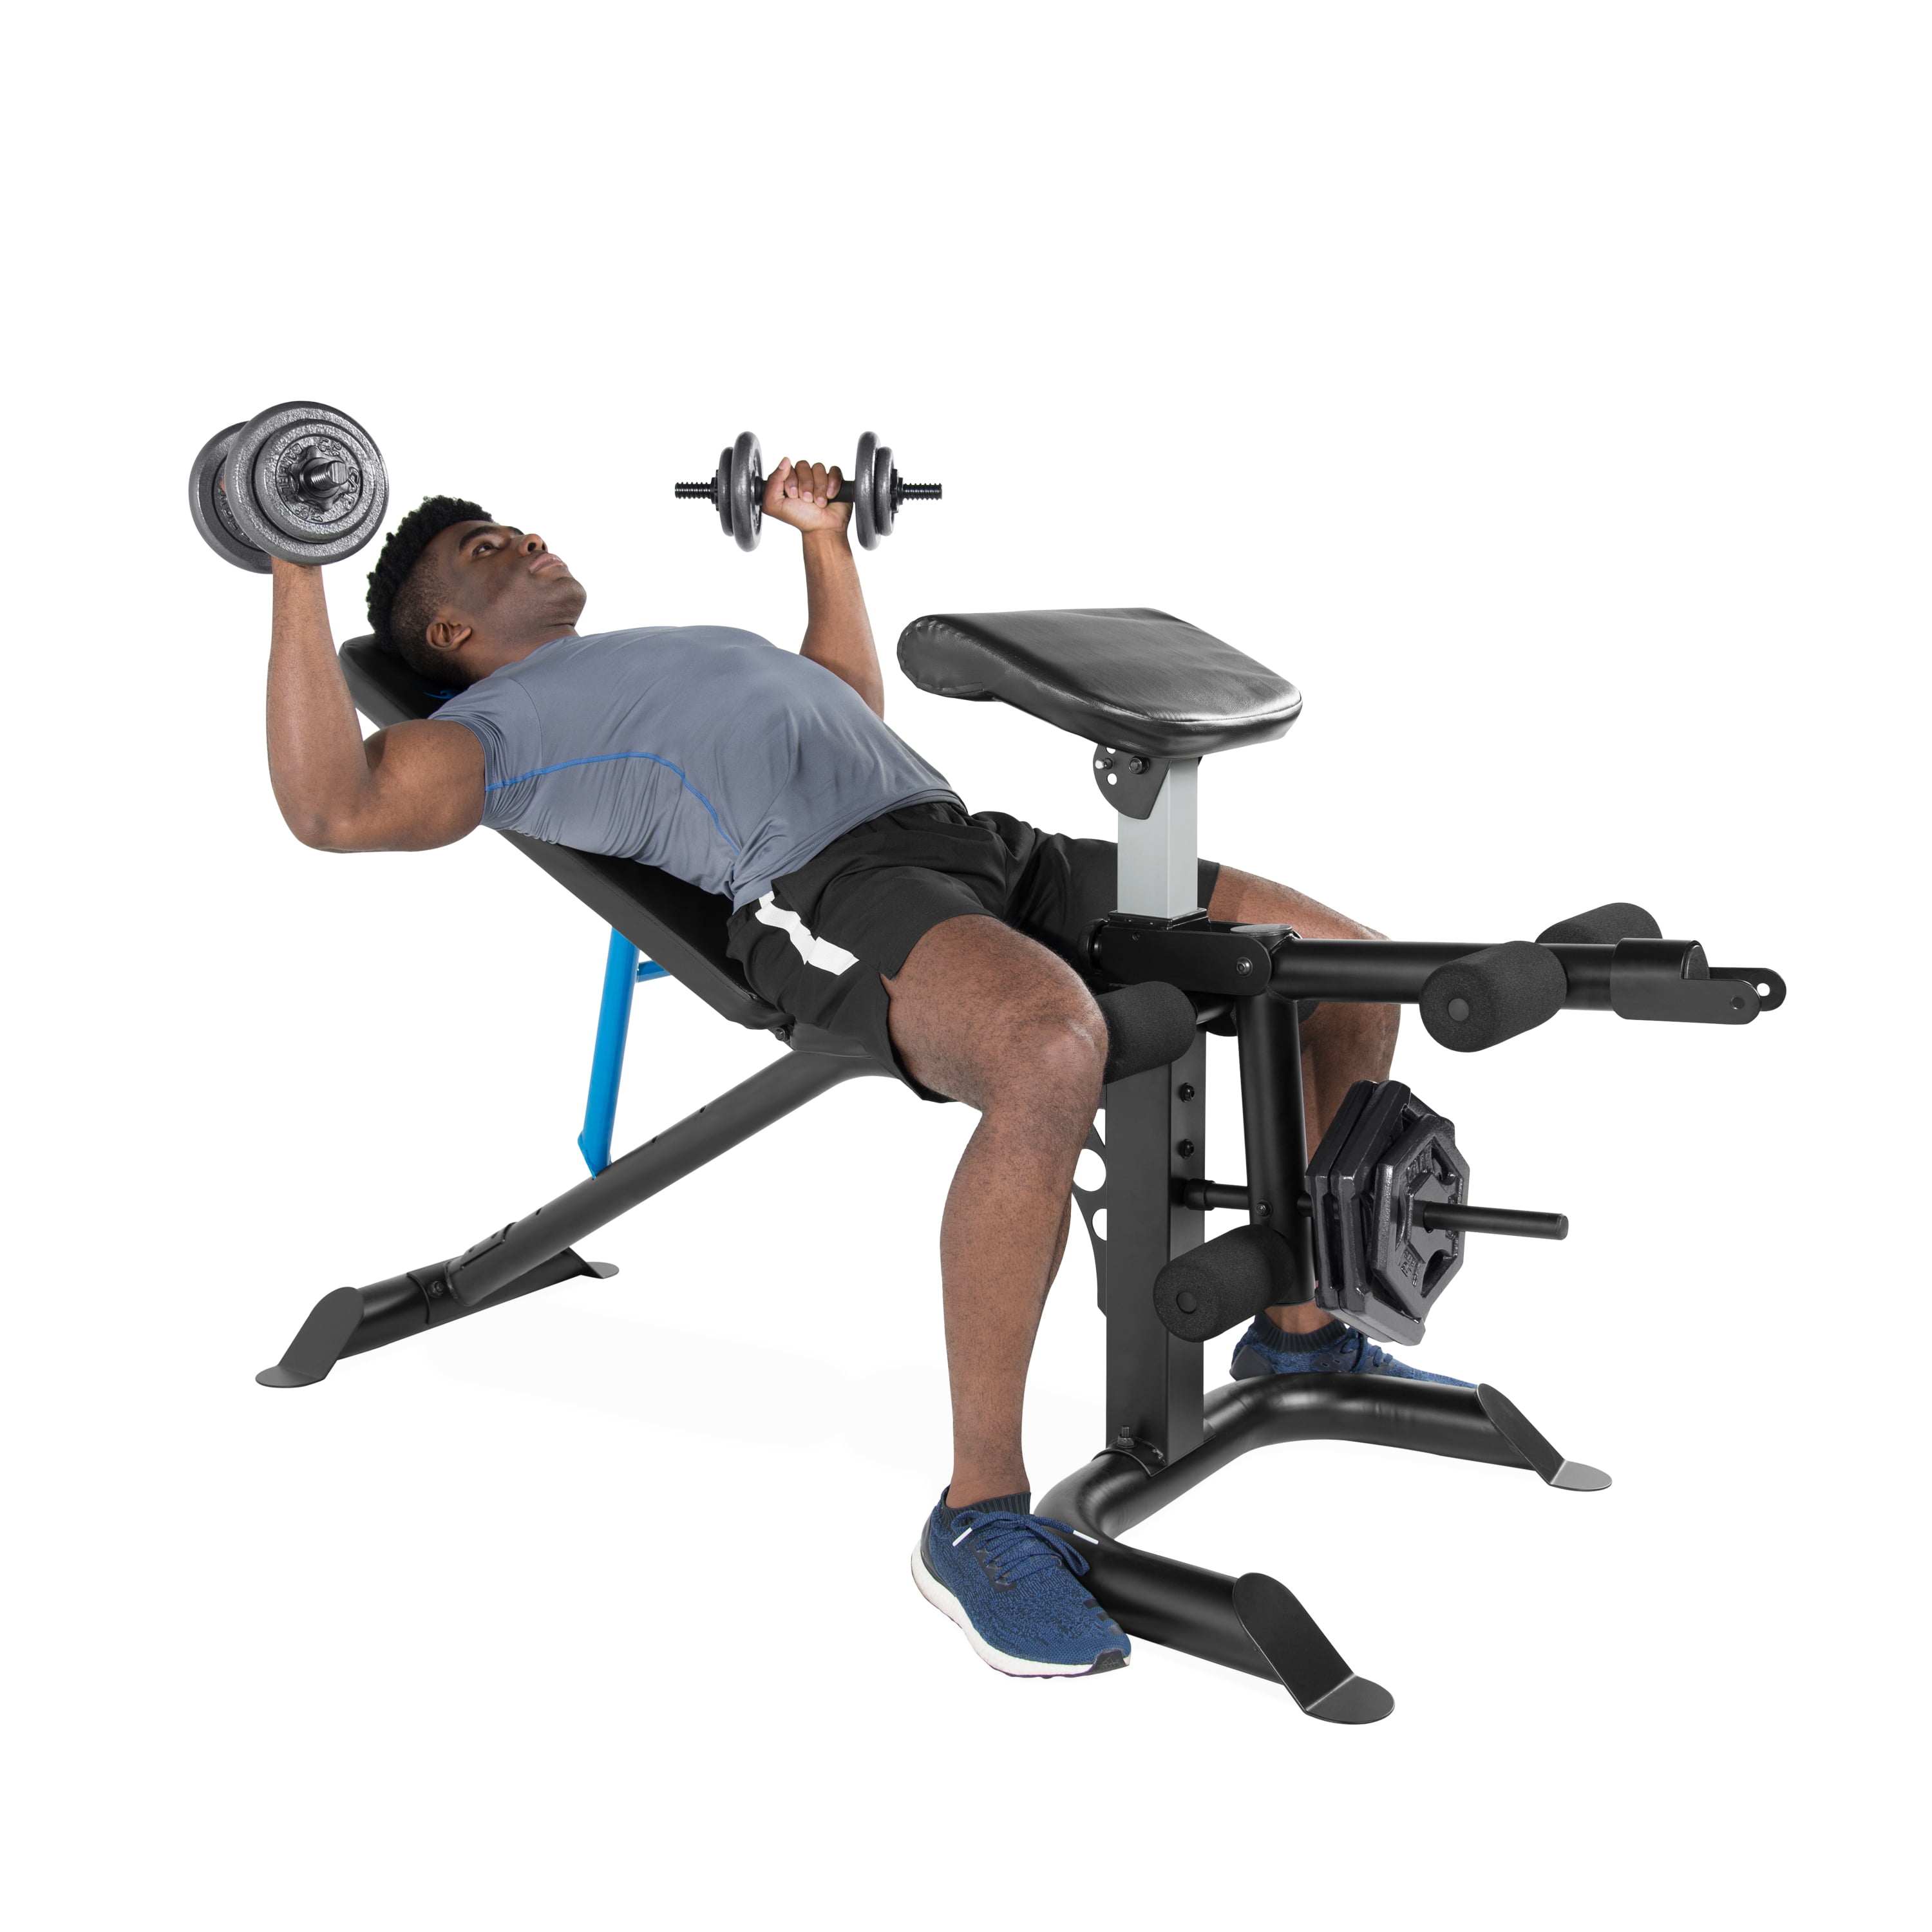  Full Body Workout Bench Press for Gym